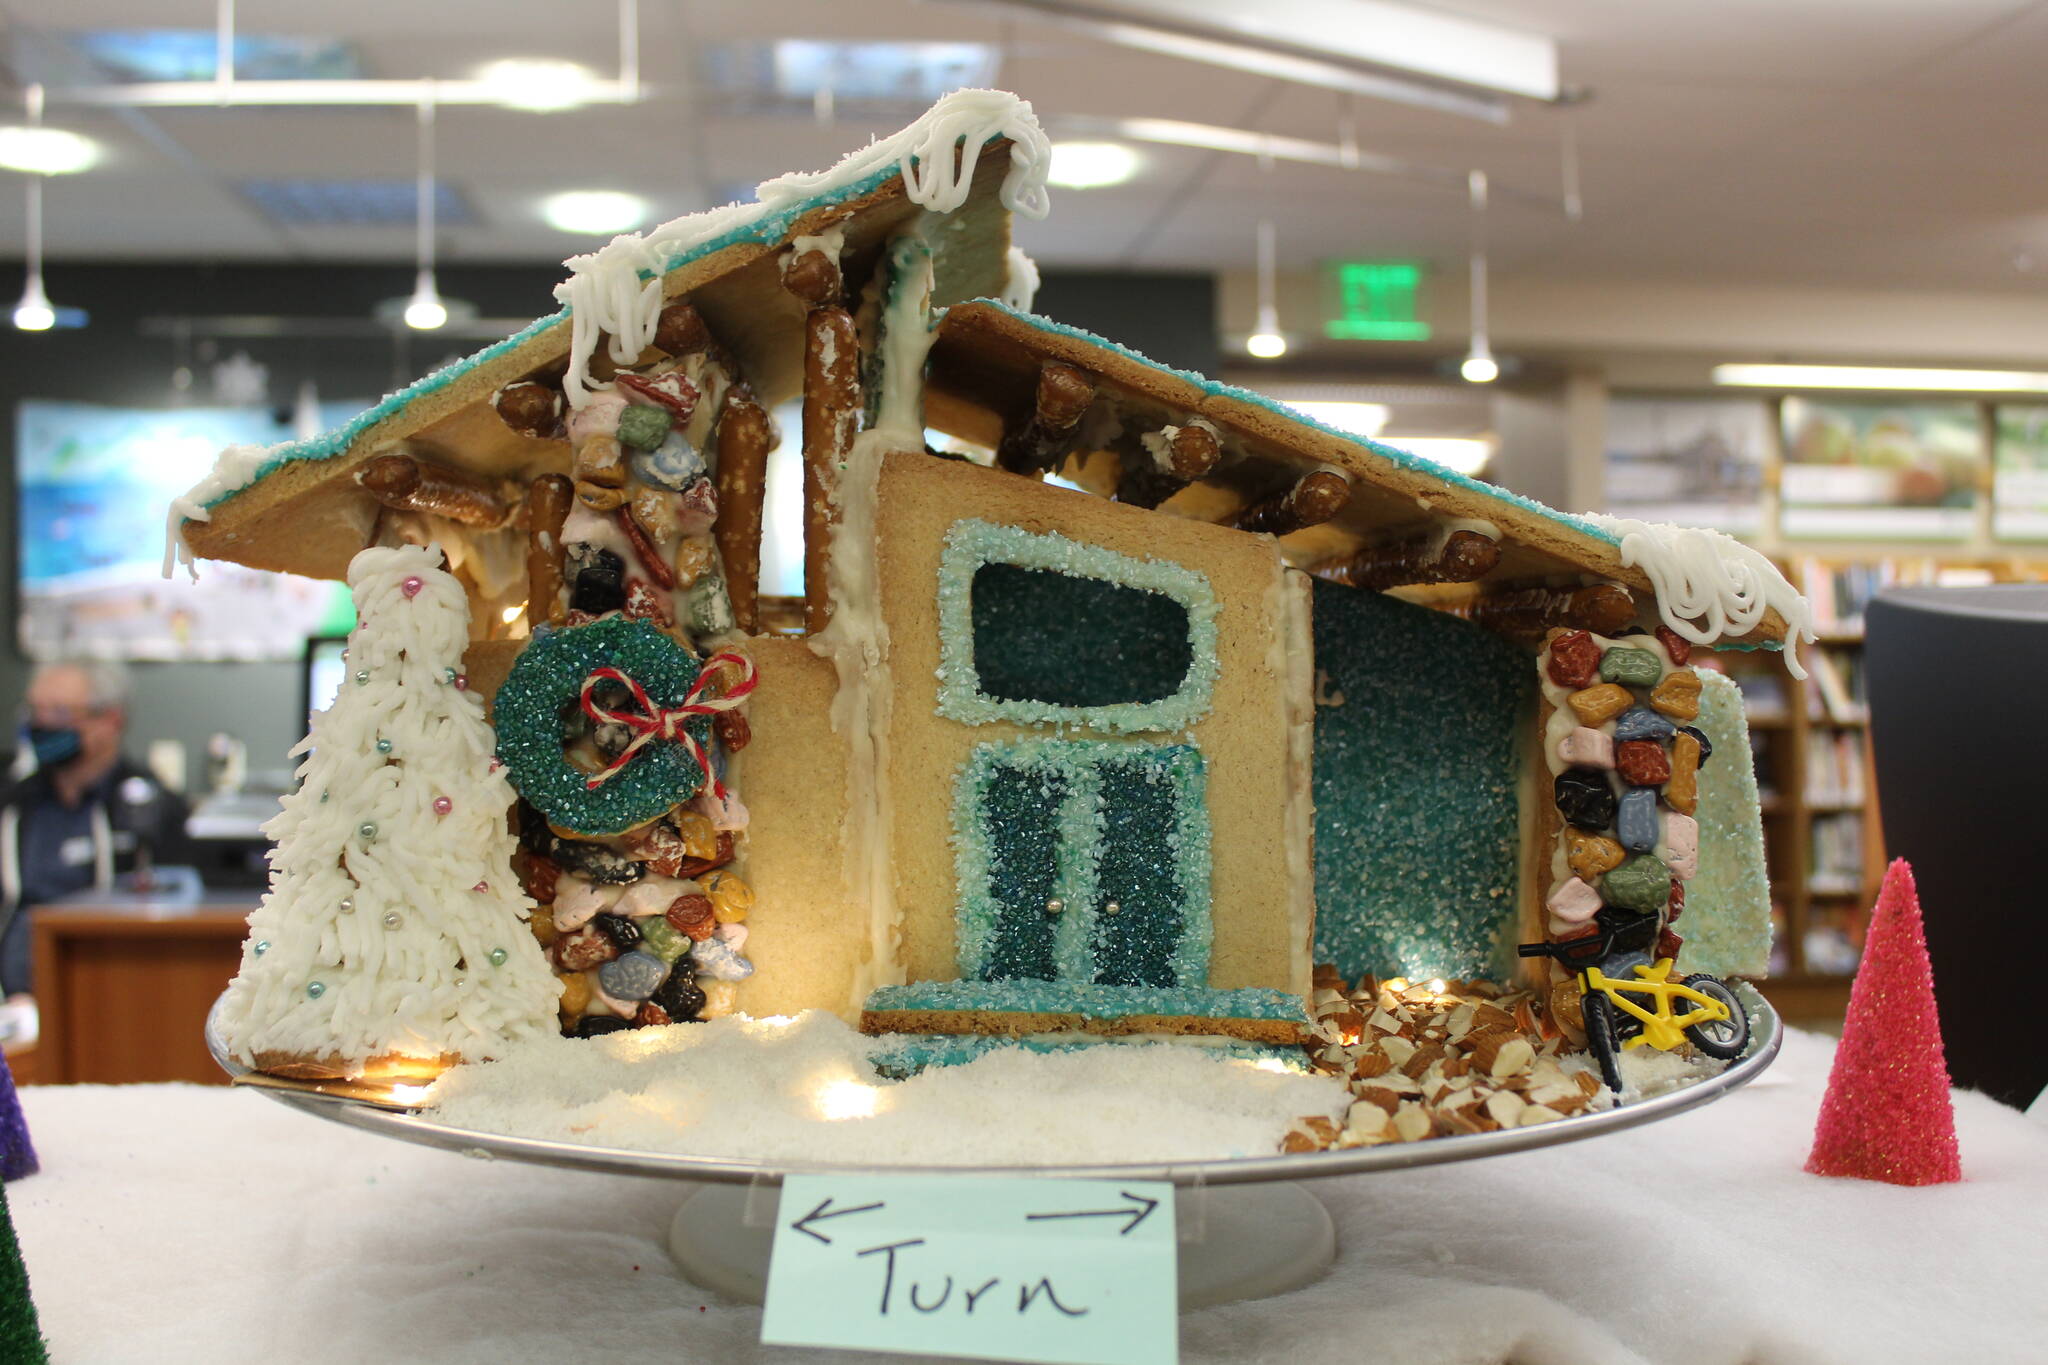 File photo by Karina Andrew/Whidbey News-Times
This house was one of many entered in the 2021 gingerbread contest at the Coupeville Library.